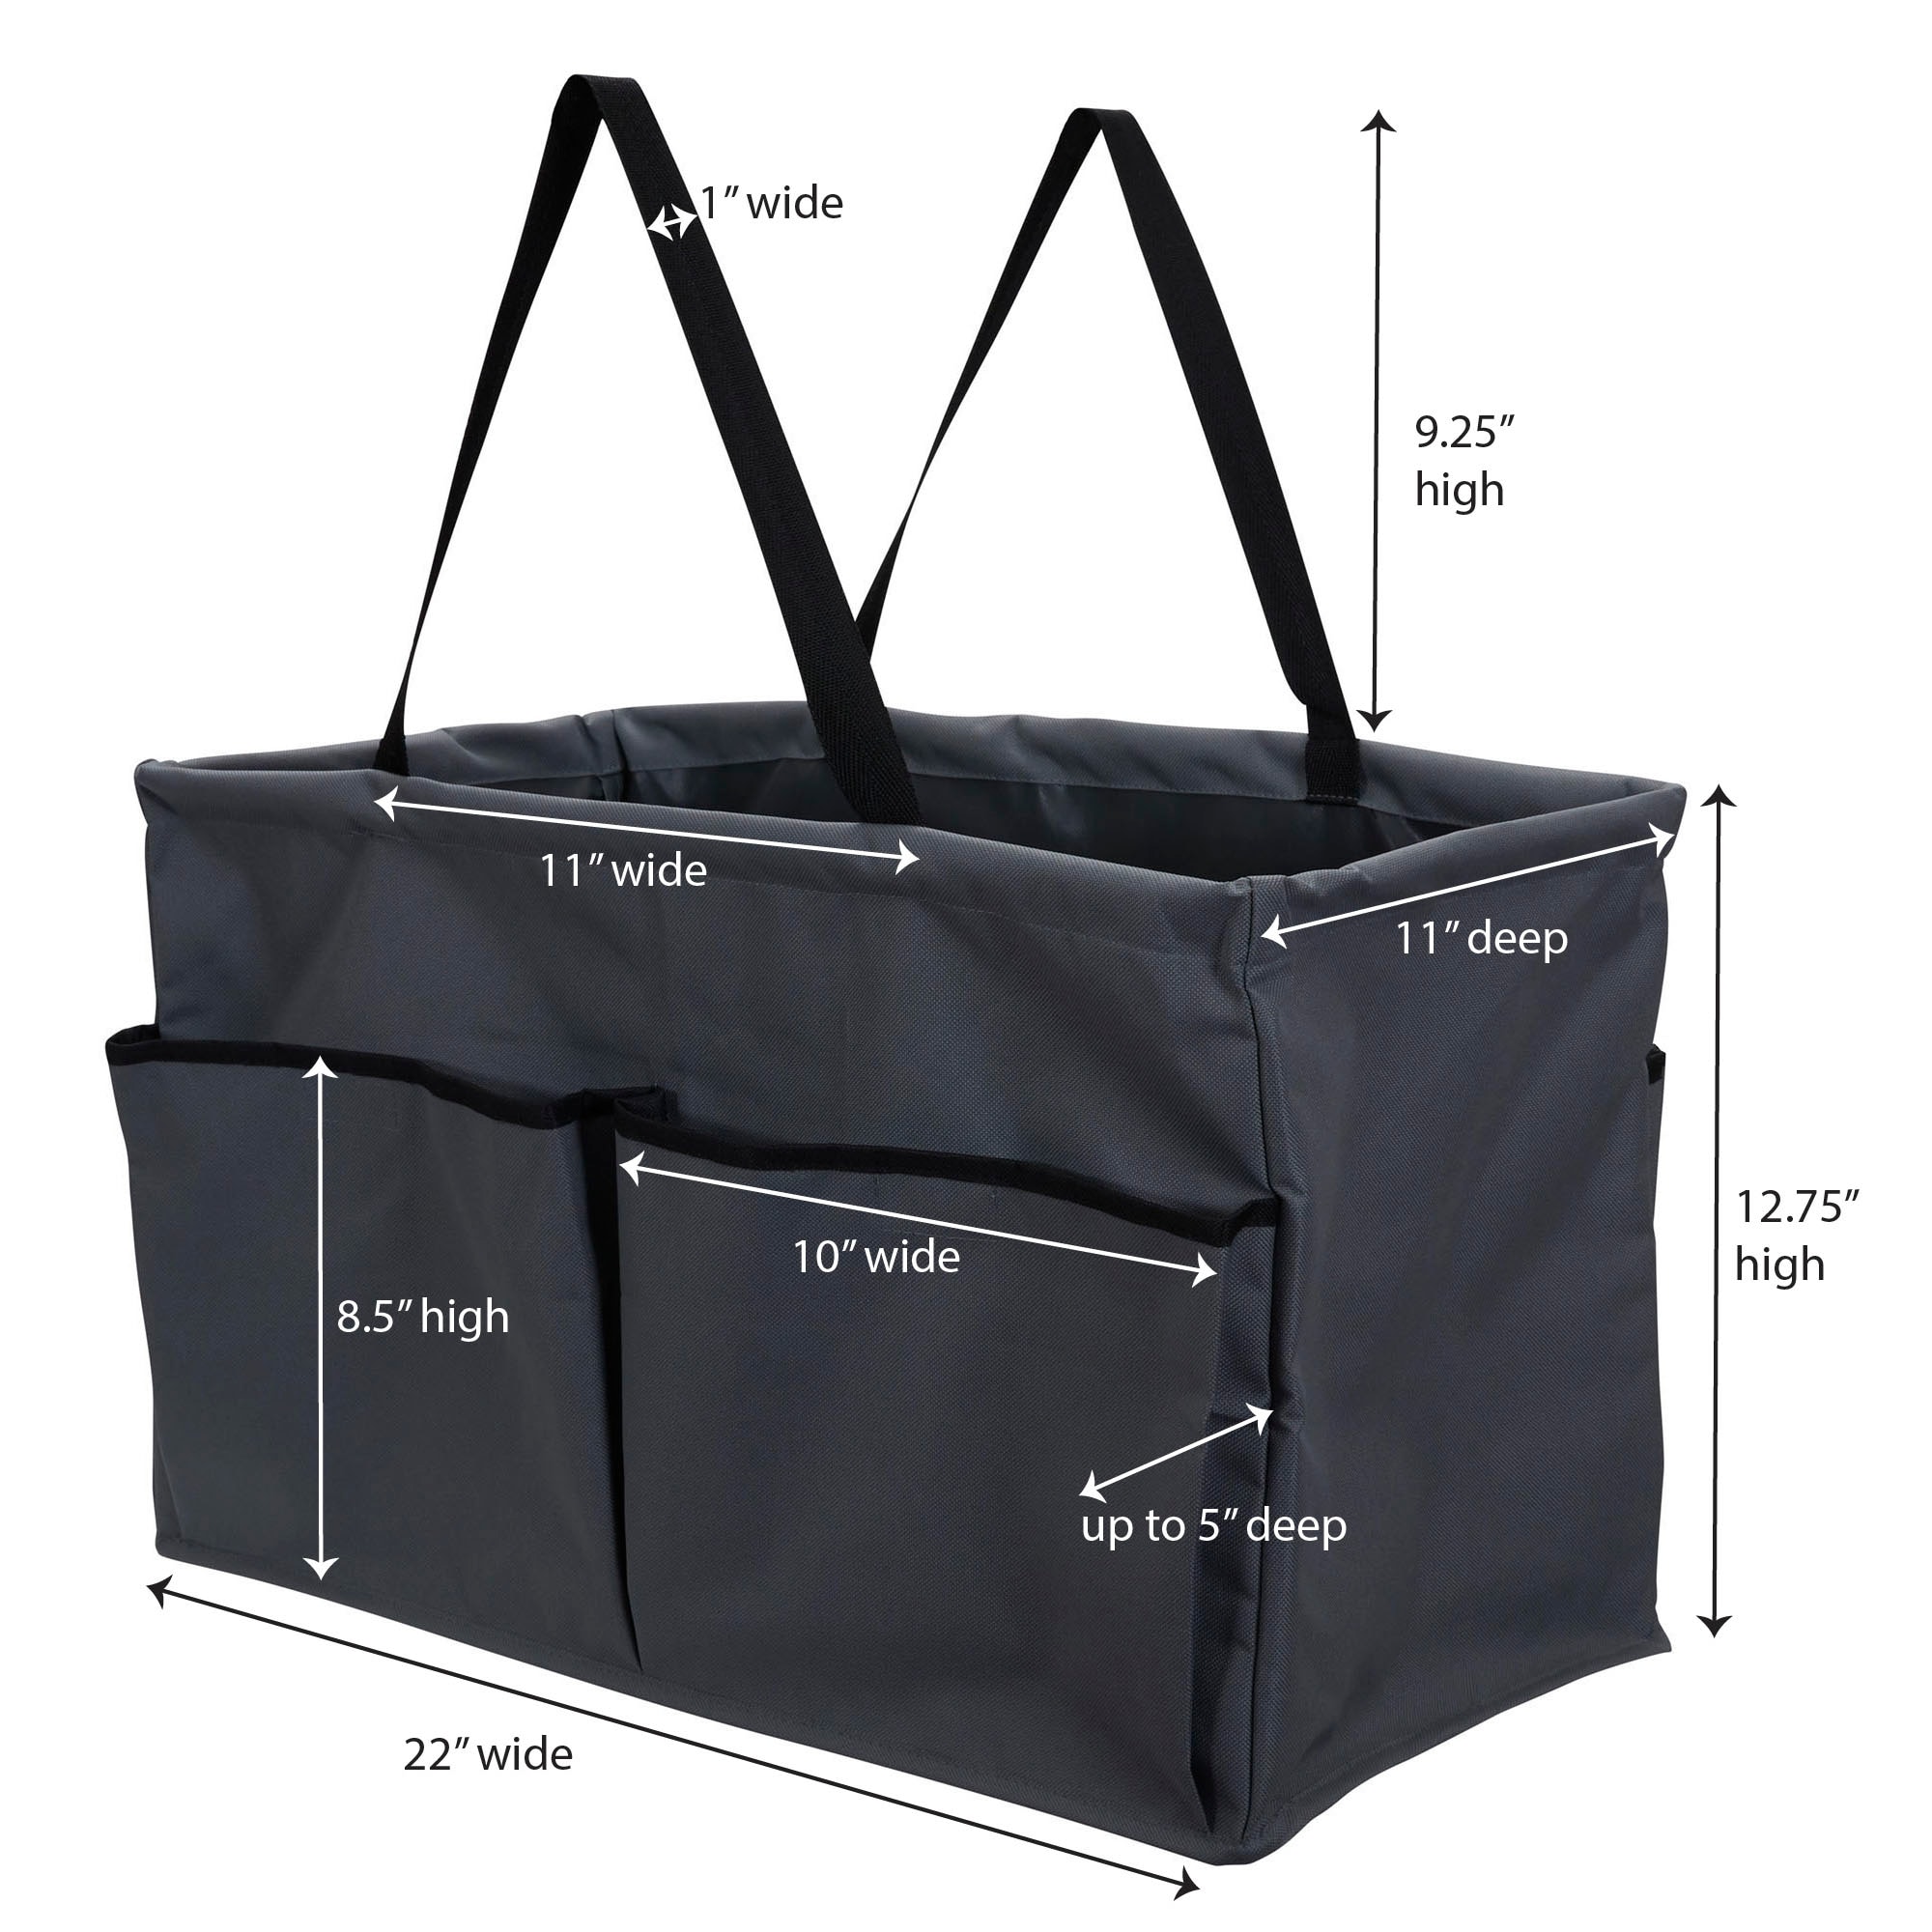 Household Essentials Krush Rectangle Water Resistant Utility Tote